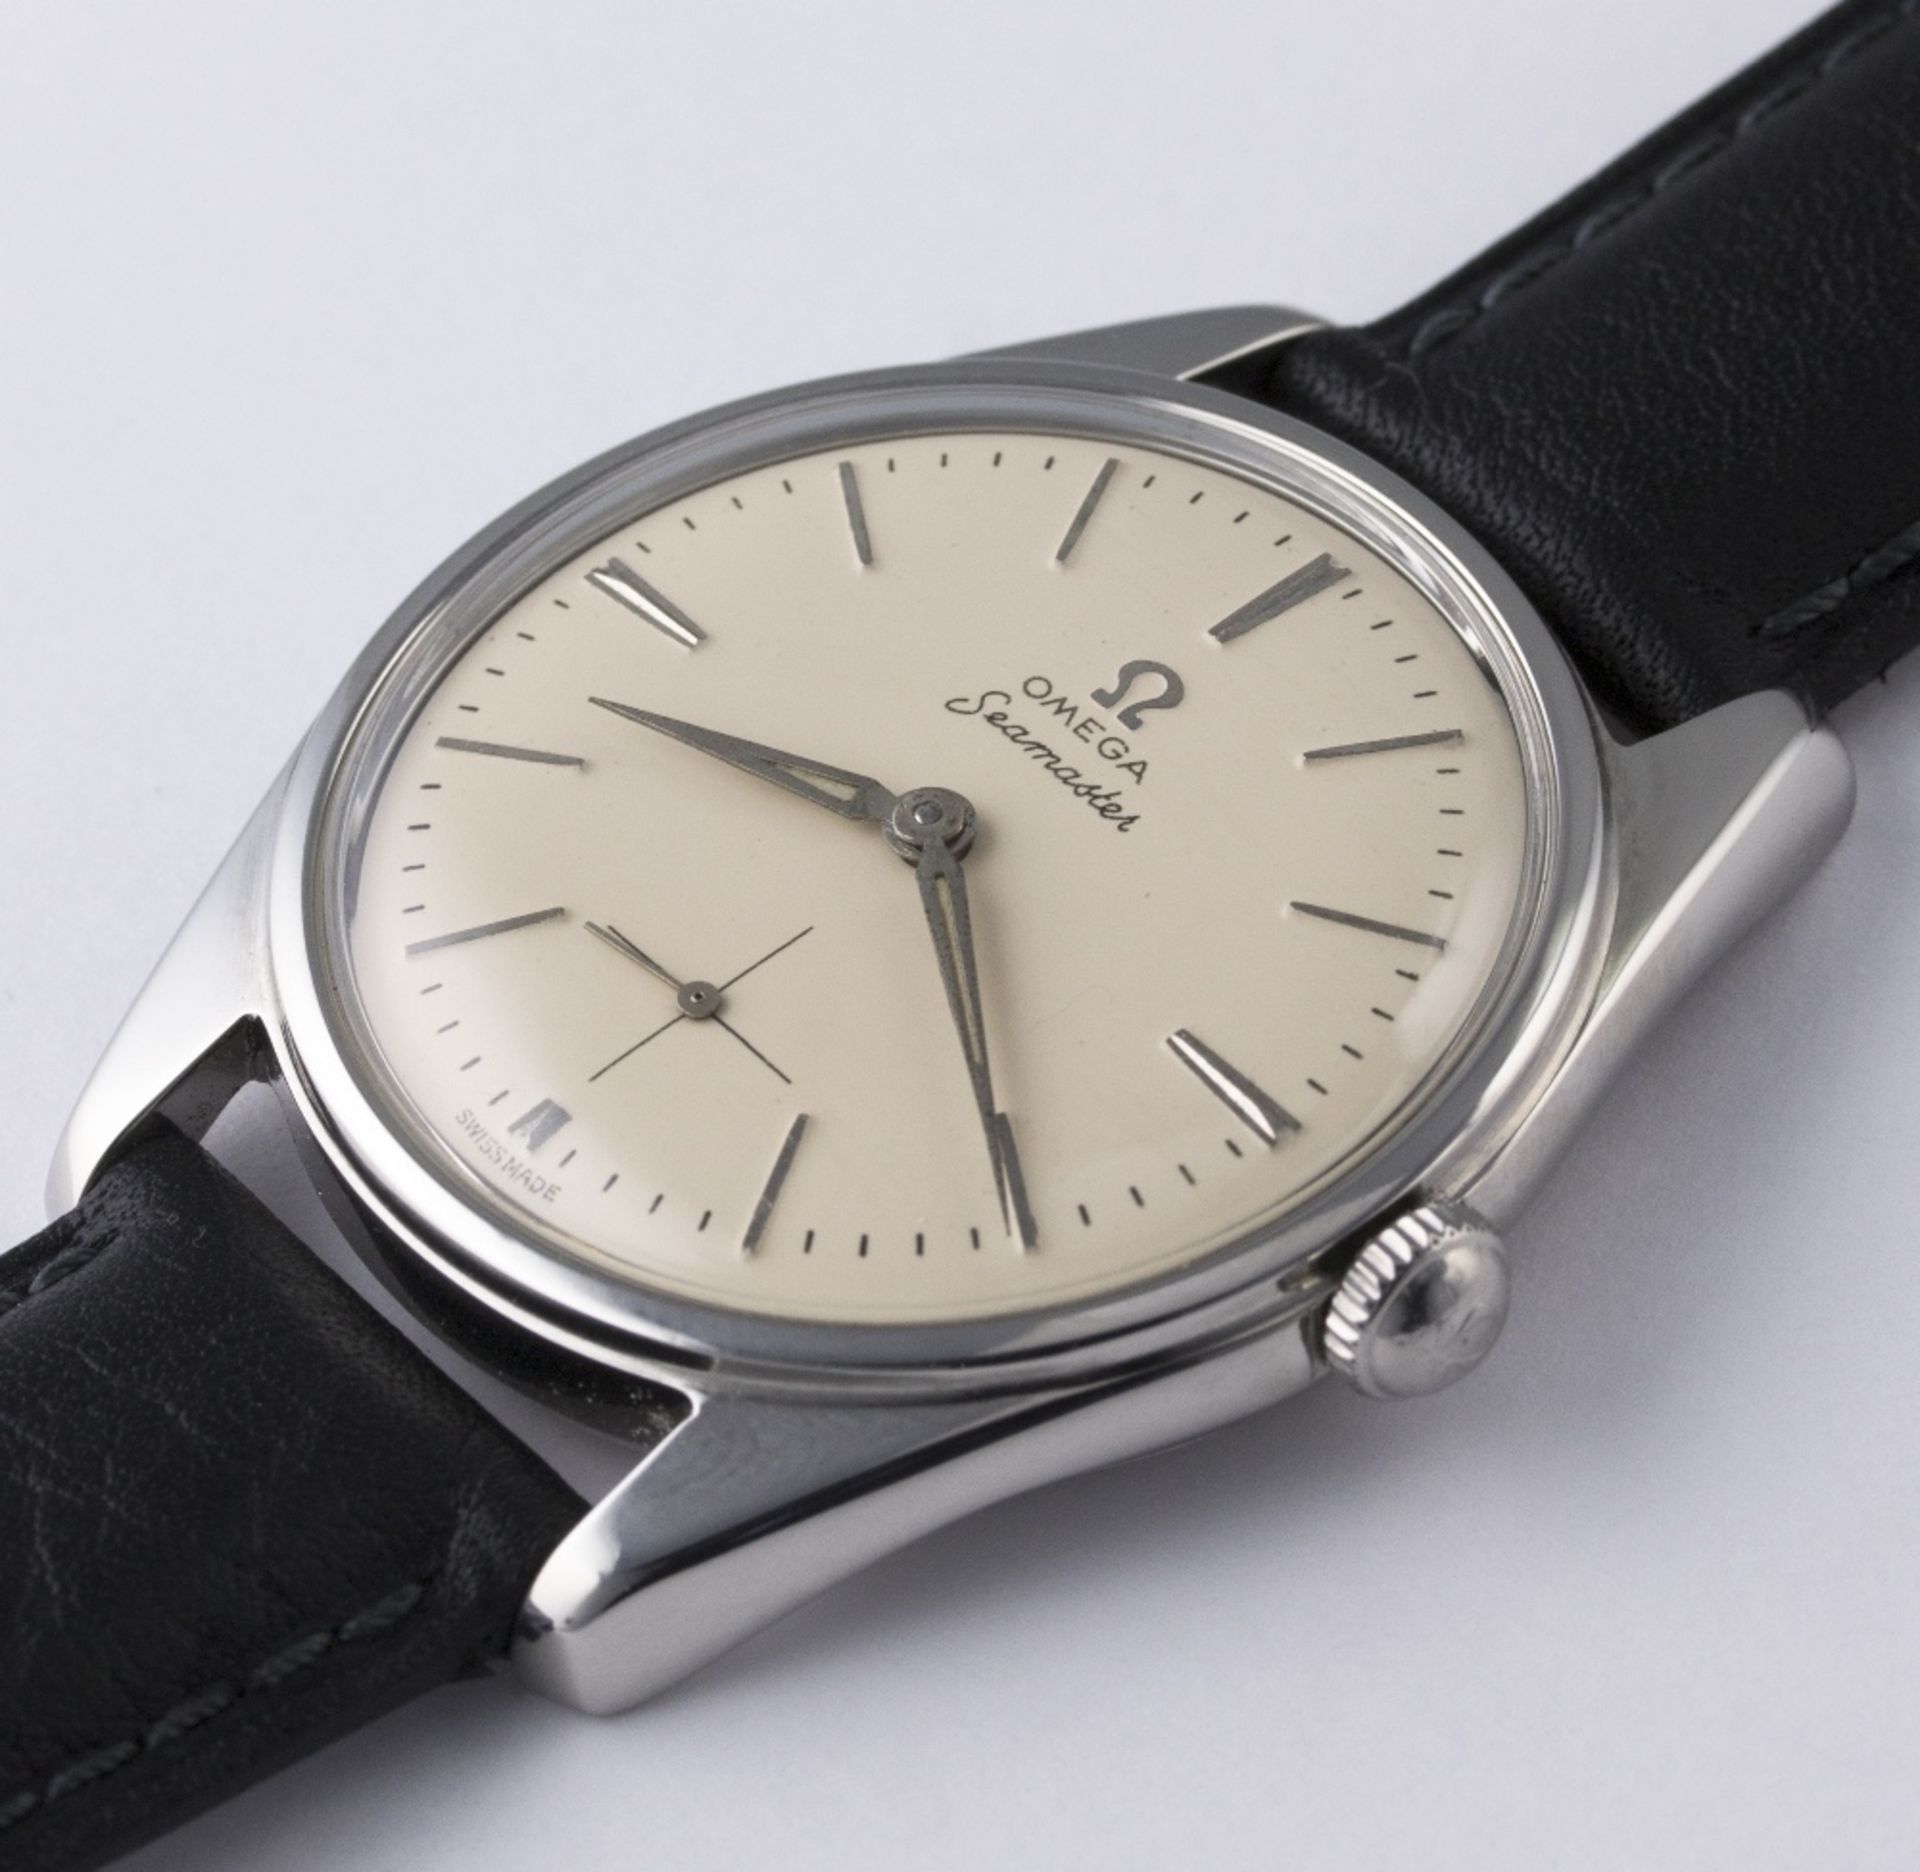 A GENTLEMAN'S LARGE SIZE STAINLESS STEEL OMEGA SEAMASTER WRIST WATCH CIRCA 1960, REF. 2990-1 - Image 3 of 8